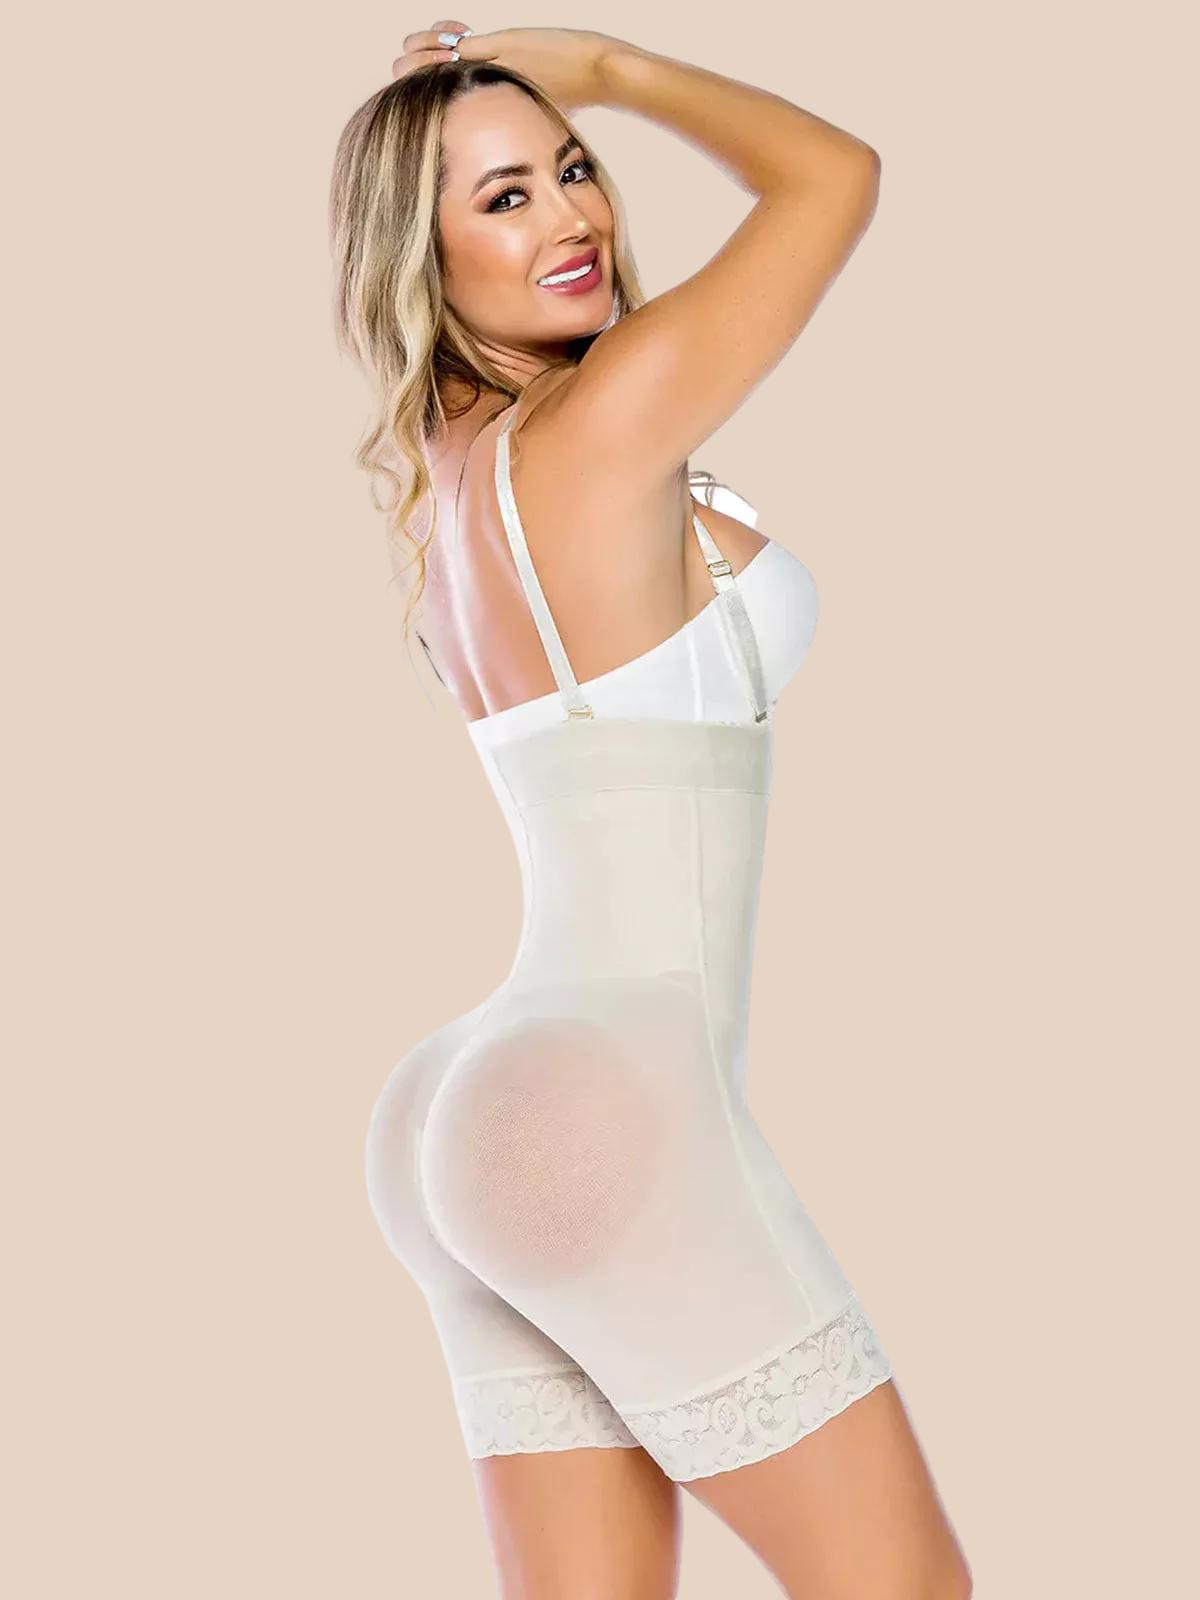 Apricot 1 Pc Fajas Colombianas High Waist Trainer Body Shapewear Slimming  Sheath Women Flat Belly Butt Lifter Shapers Panties Push Up Corset With